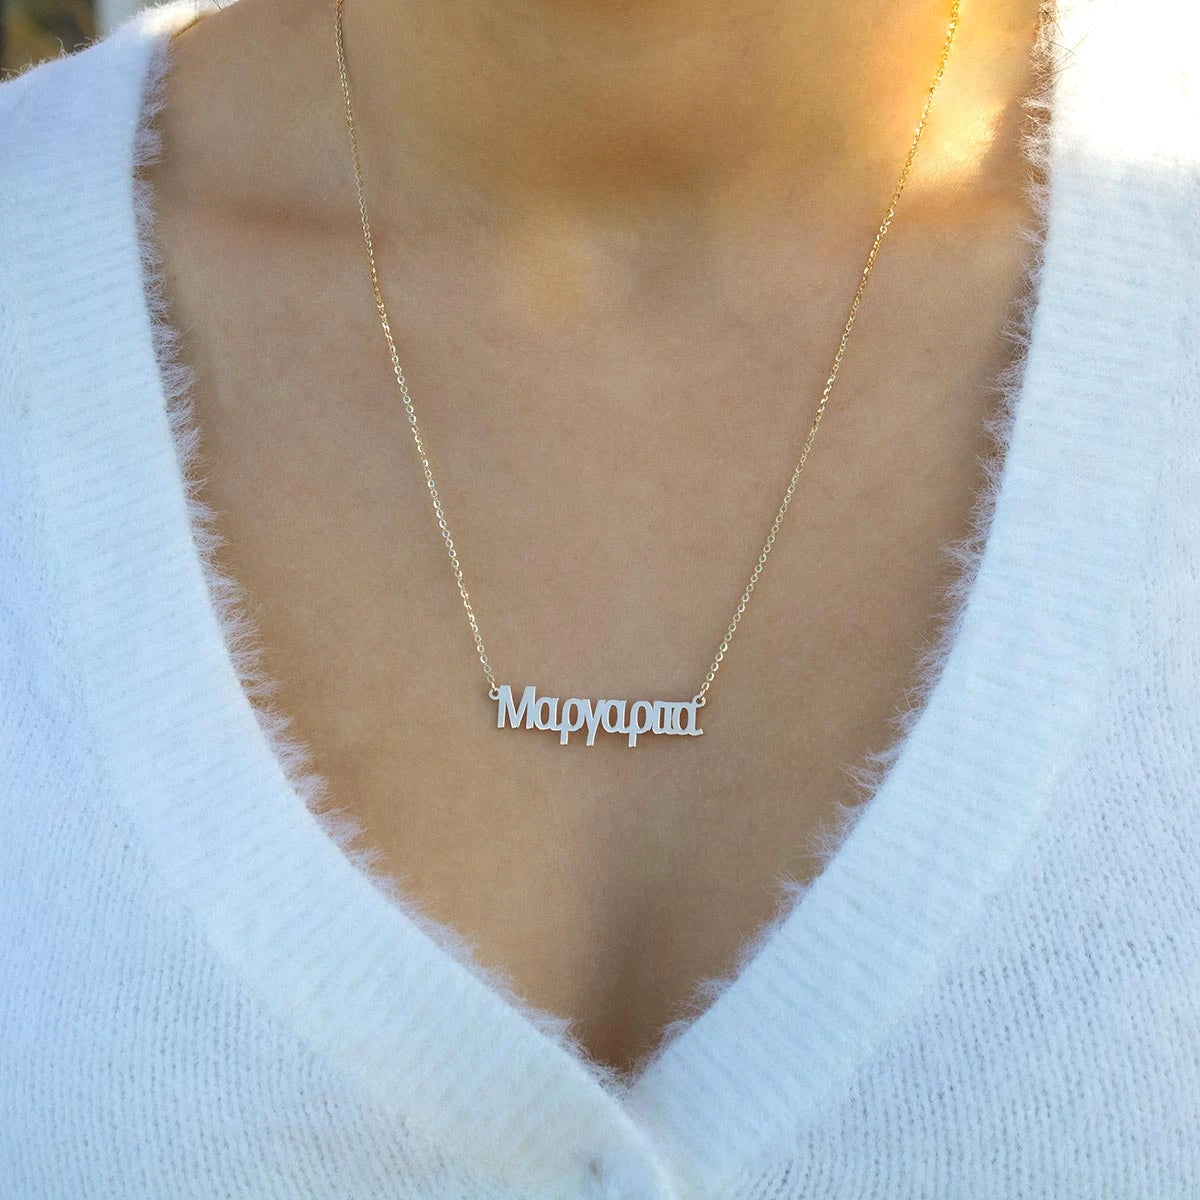 Greek Personalized Name Necklace